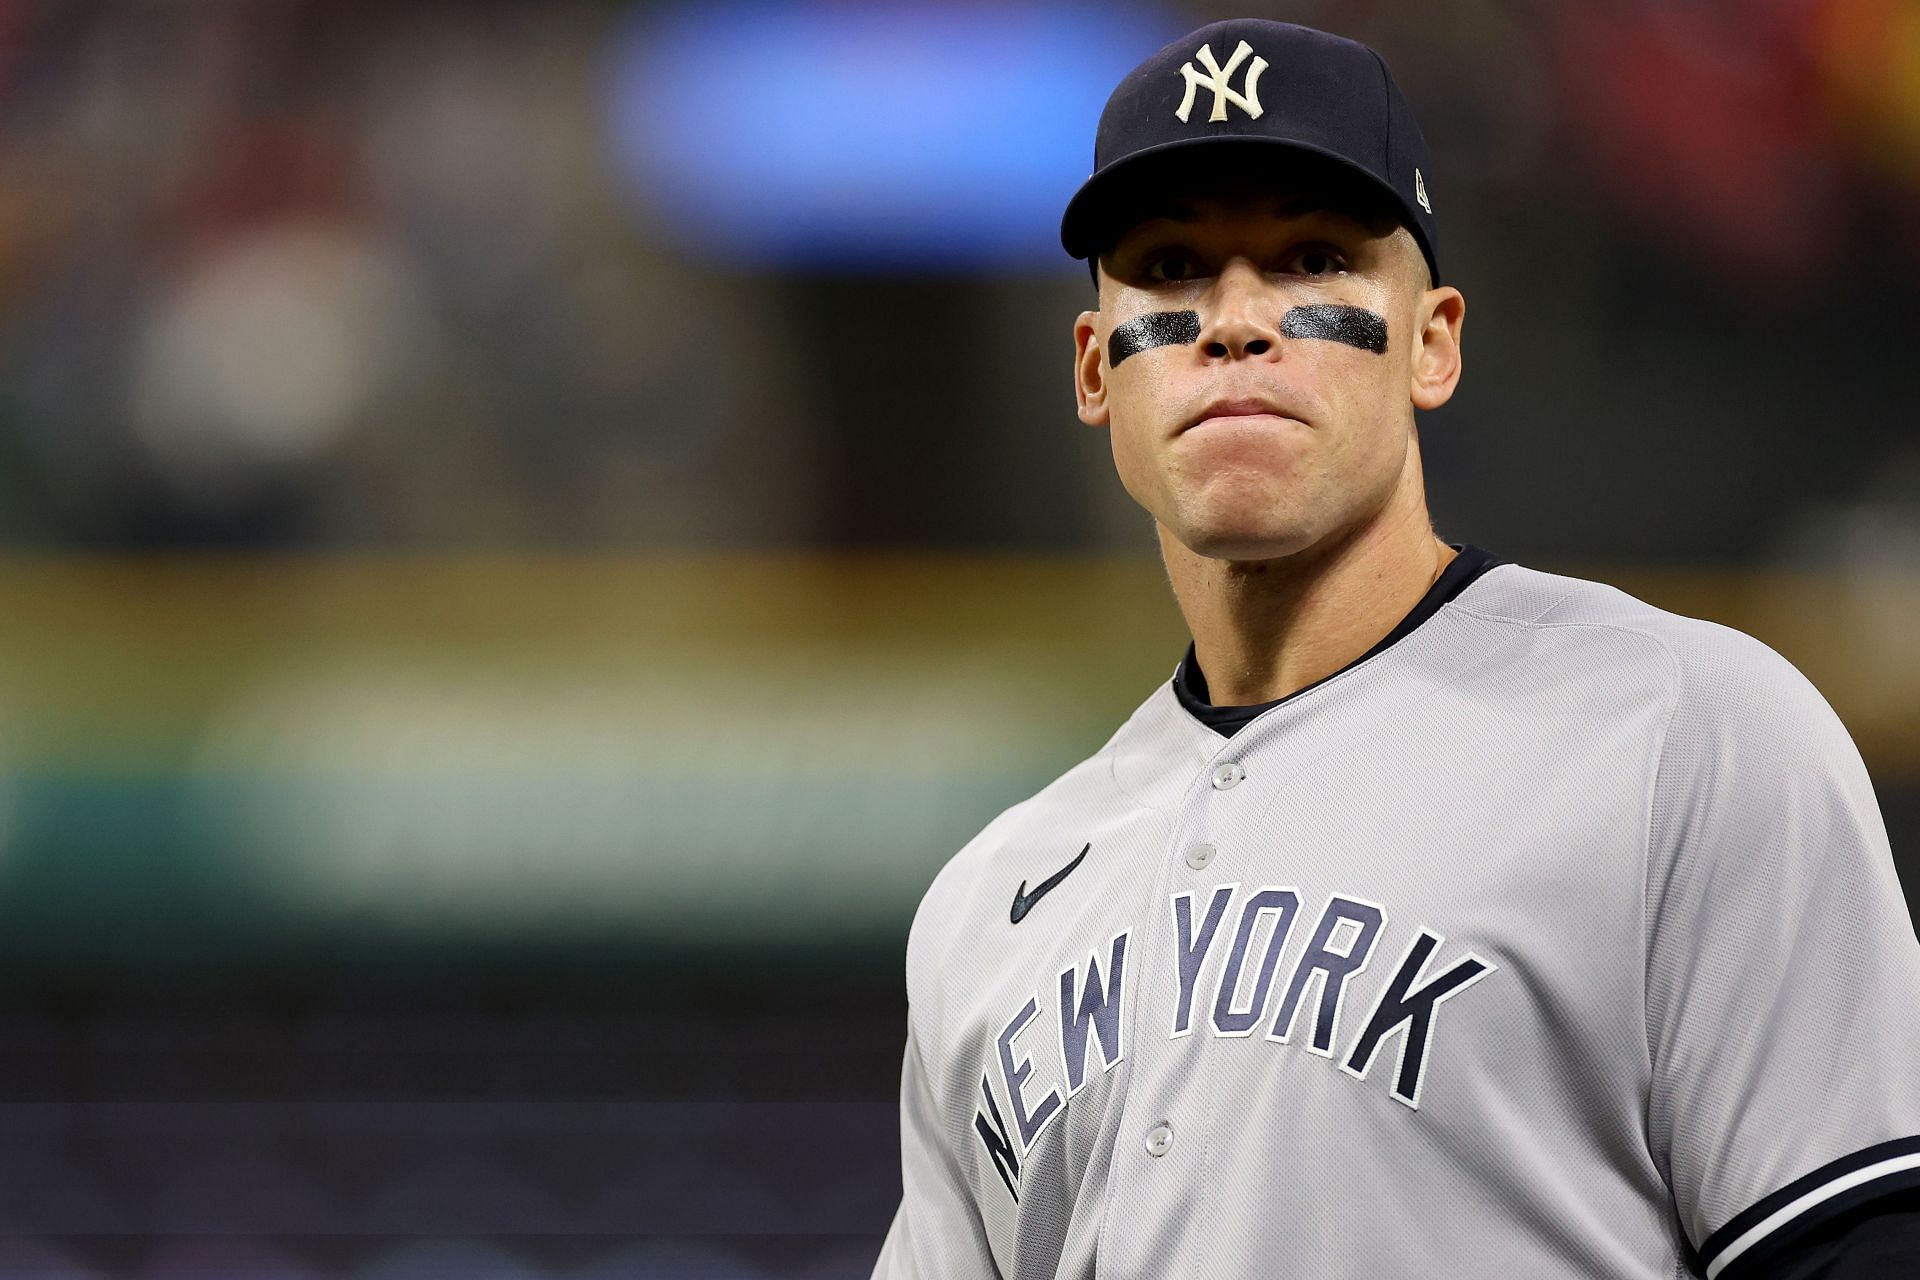 MLB Insider on Aaron Judge: The Giants are clearly gung-ho in their  efforts and said to be 'elated' by their visit this week with Judge